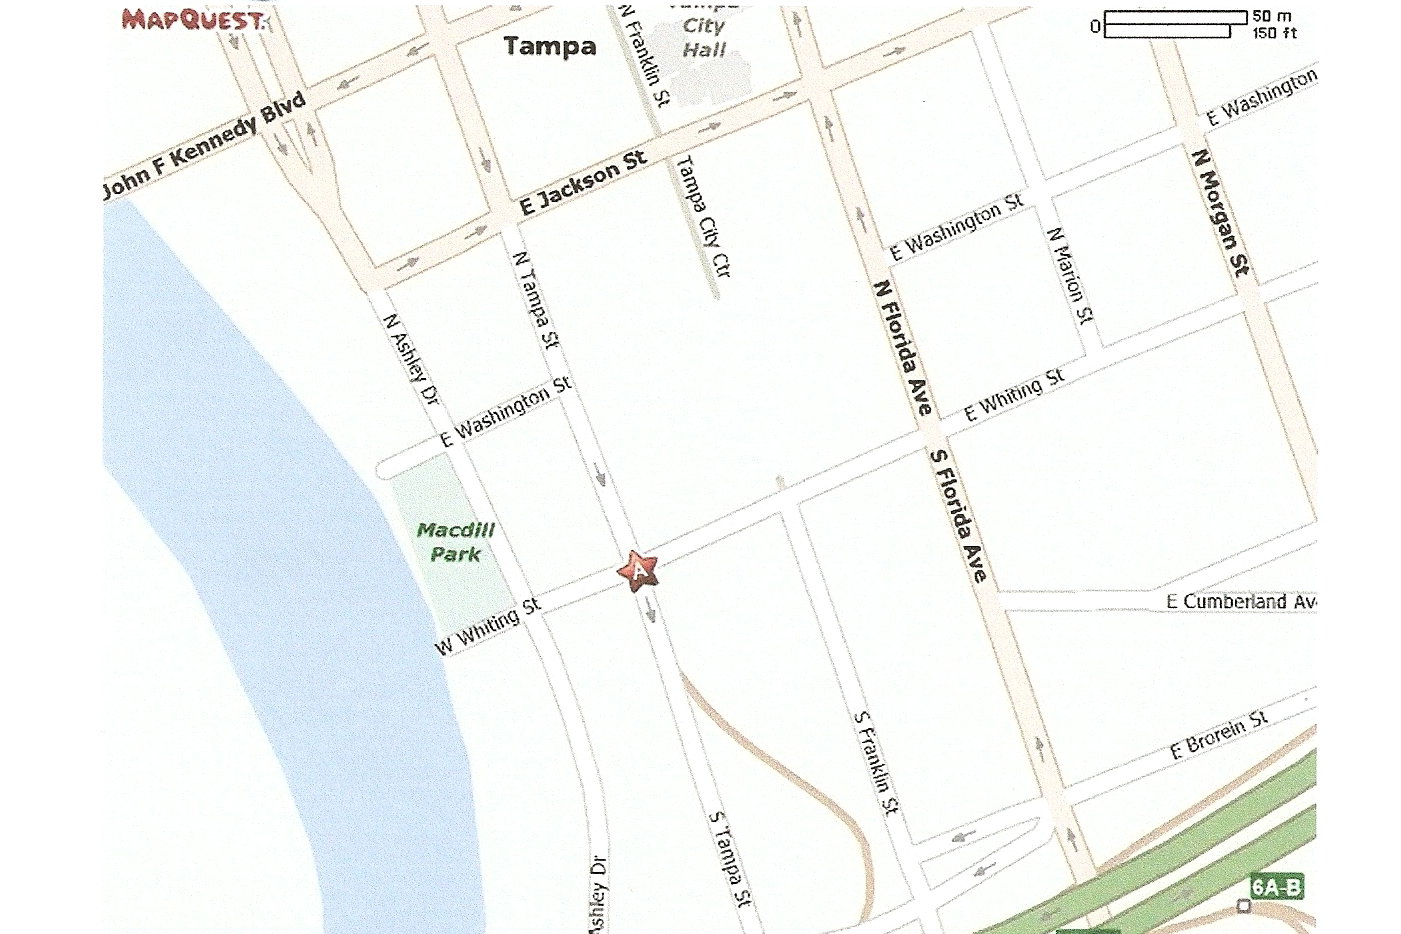 Map of downtown Tampa showing location of Richard Lee Reporting